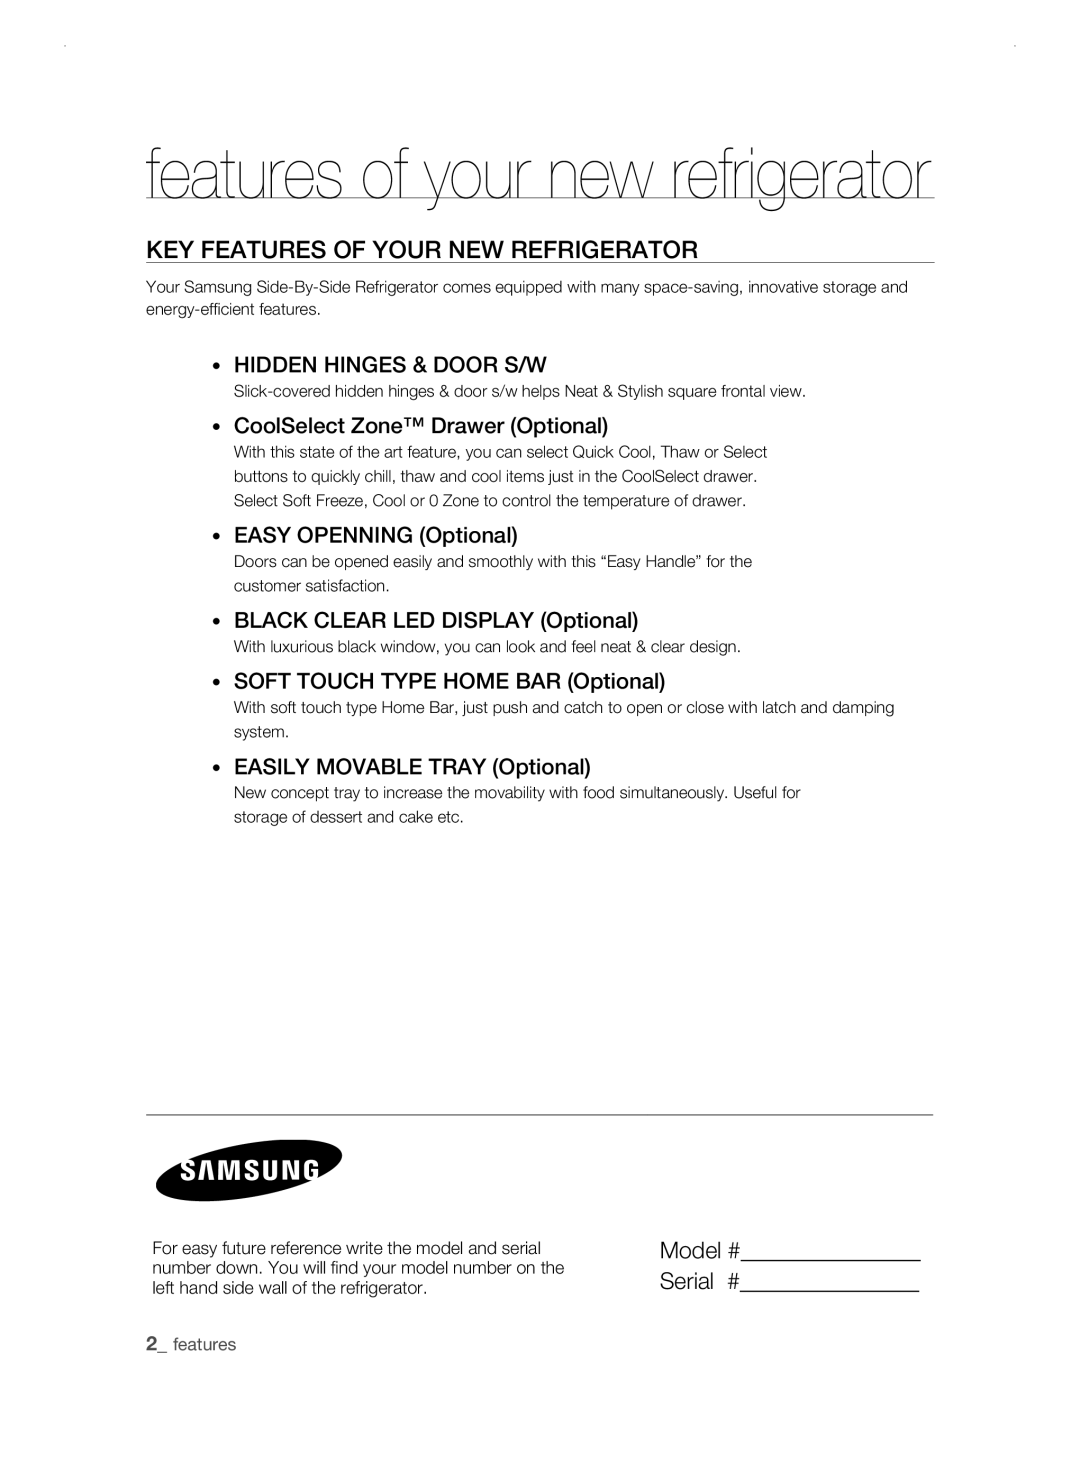 Samsung RSH3D Key features of your new refrigerator, Hidden Hinges & Door S/W, CoolSelect Zone Drawer Optional,  features 